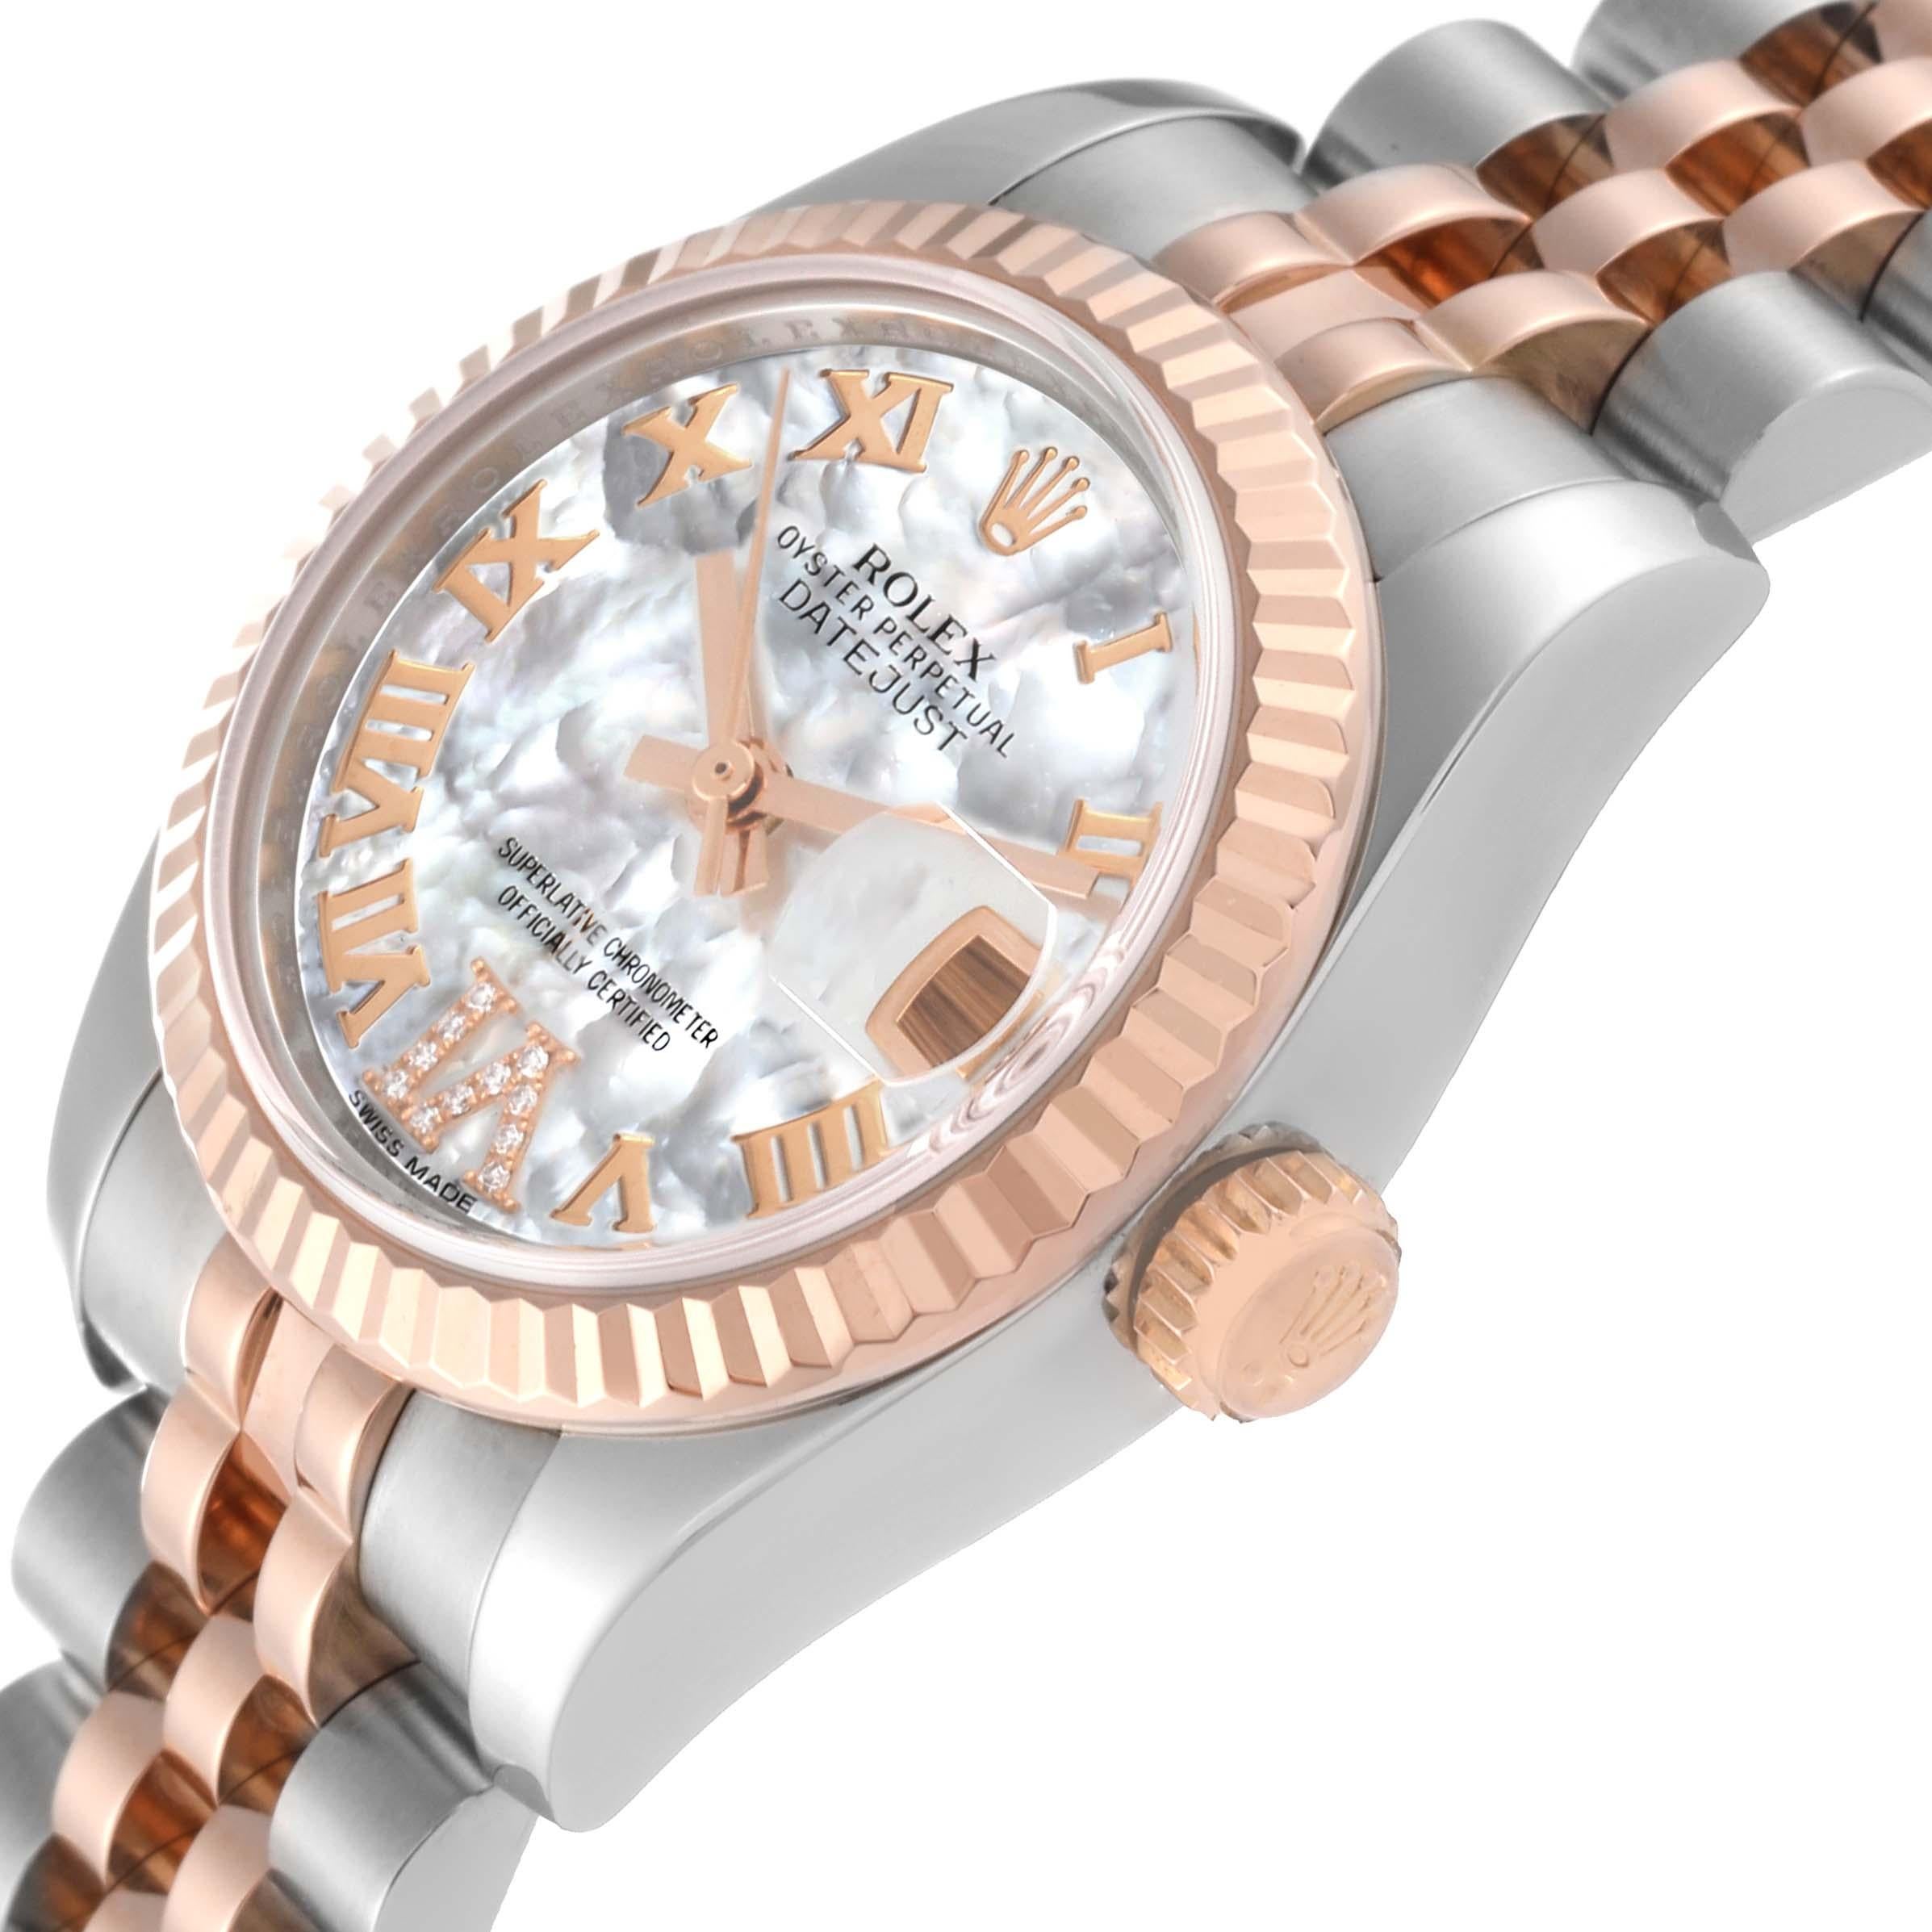 Rolex Datejust Steel Rose Gold Mother of Pearl Diamond Dial Ladies Watch 179171 For Sale 2